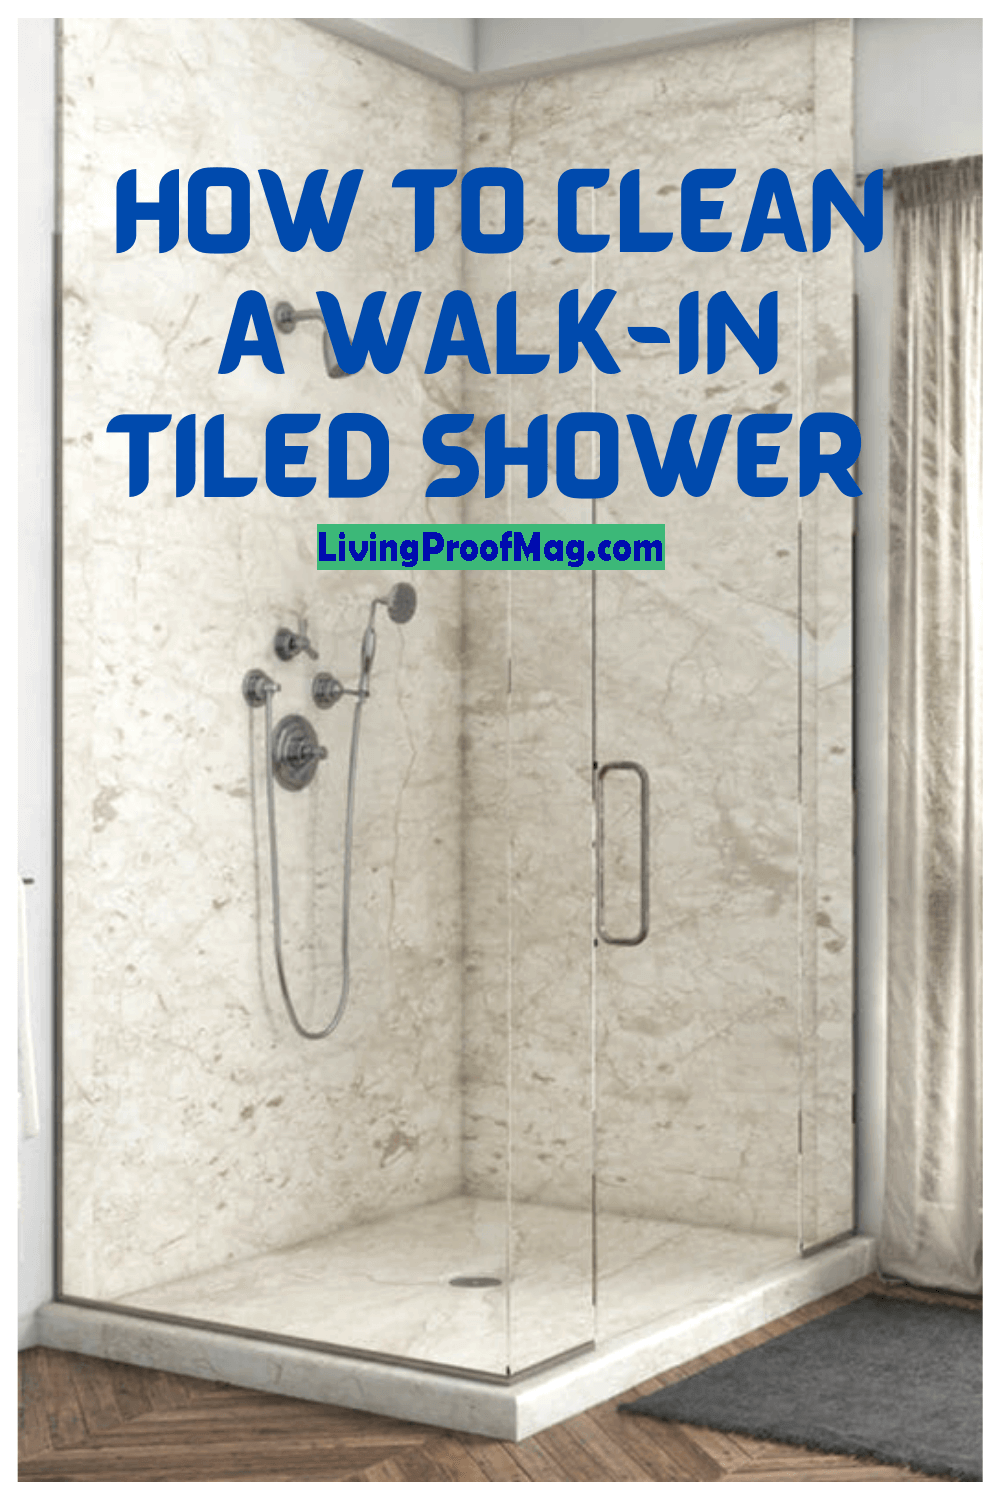 How to Clean a Walk-in Tiled Shower - Cleaning Shower Floors & Grout